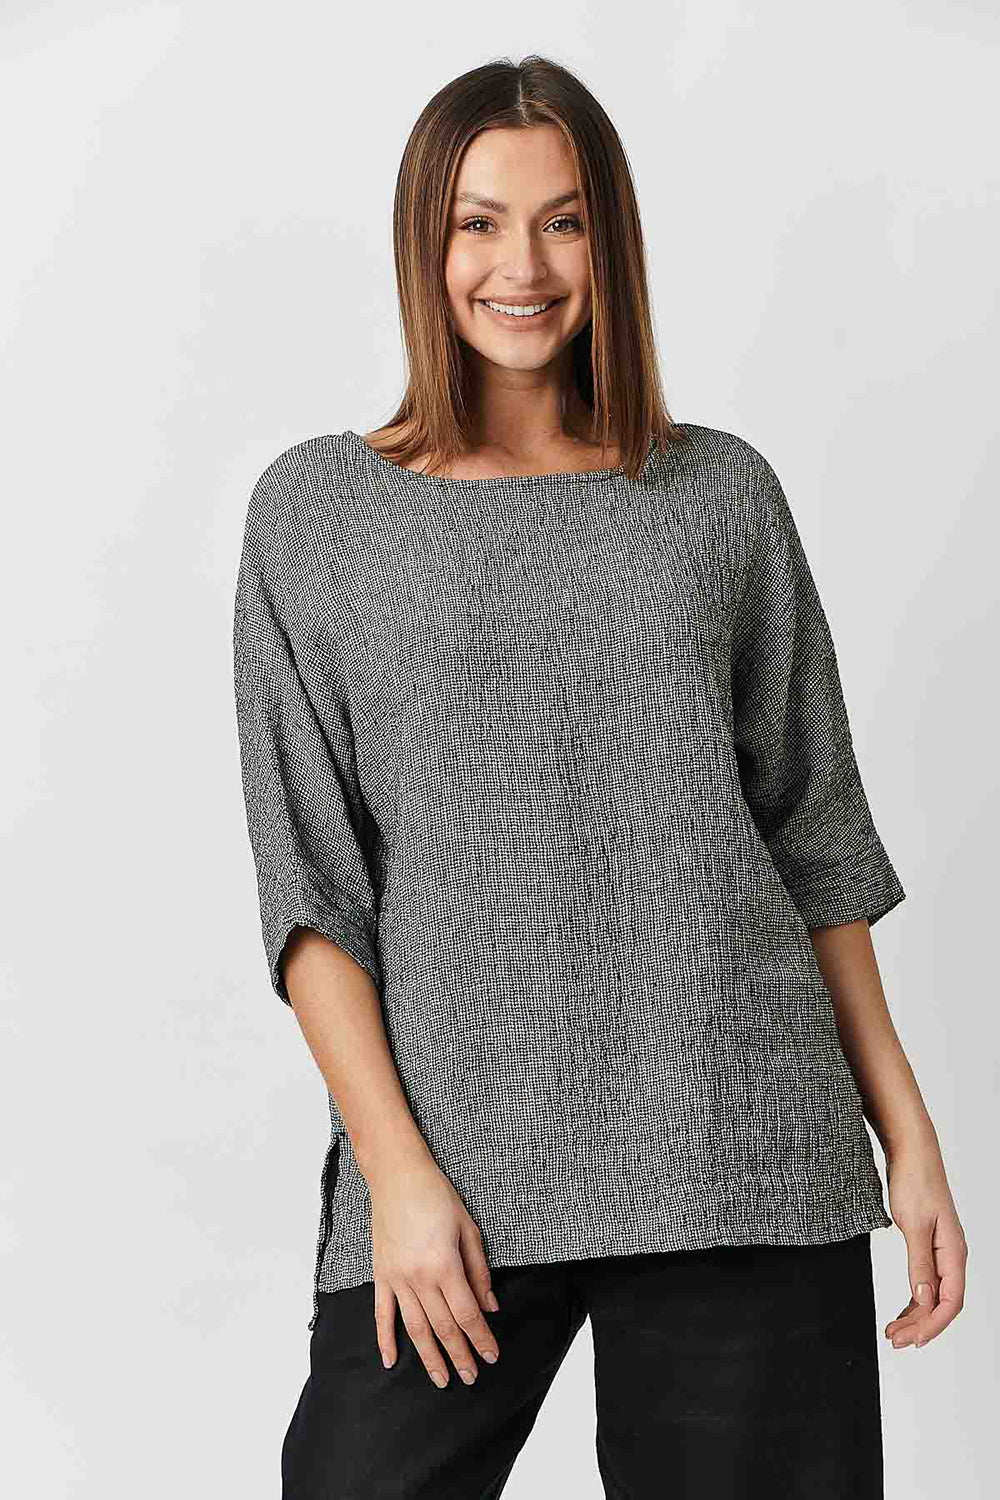 Naturals by O&J Round Neck Tunic Top GA285